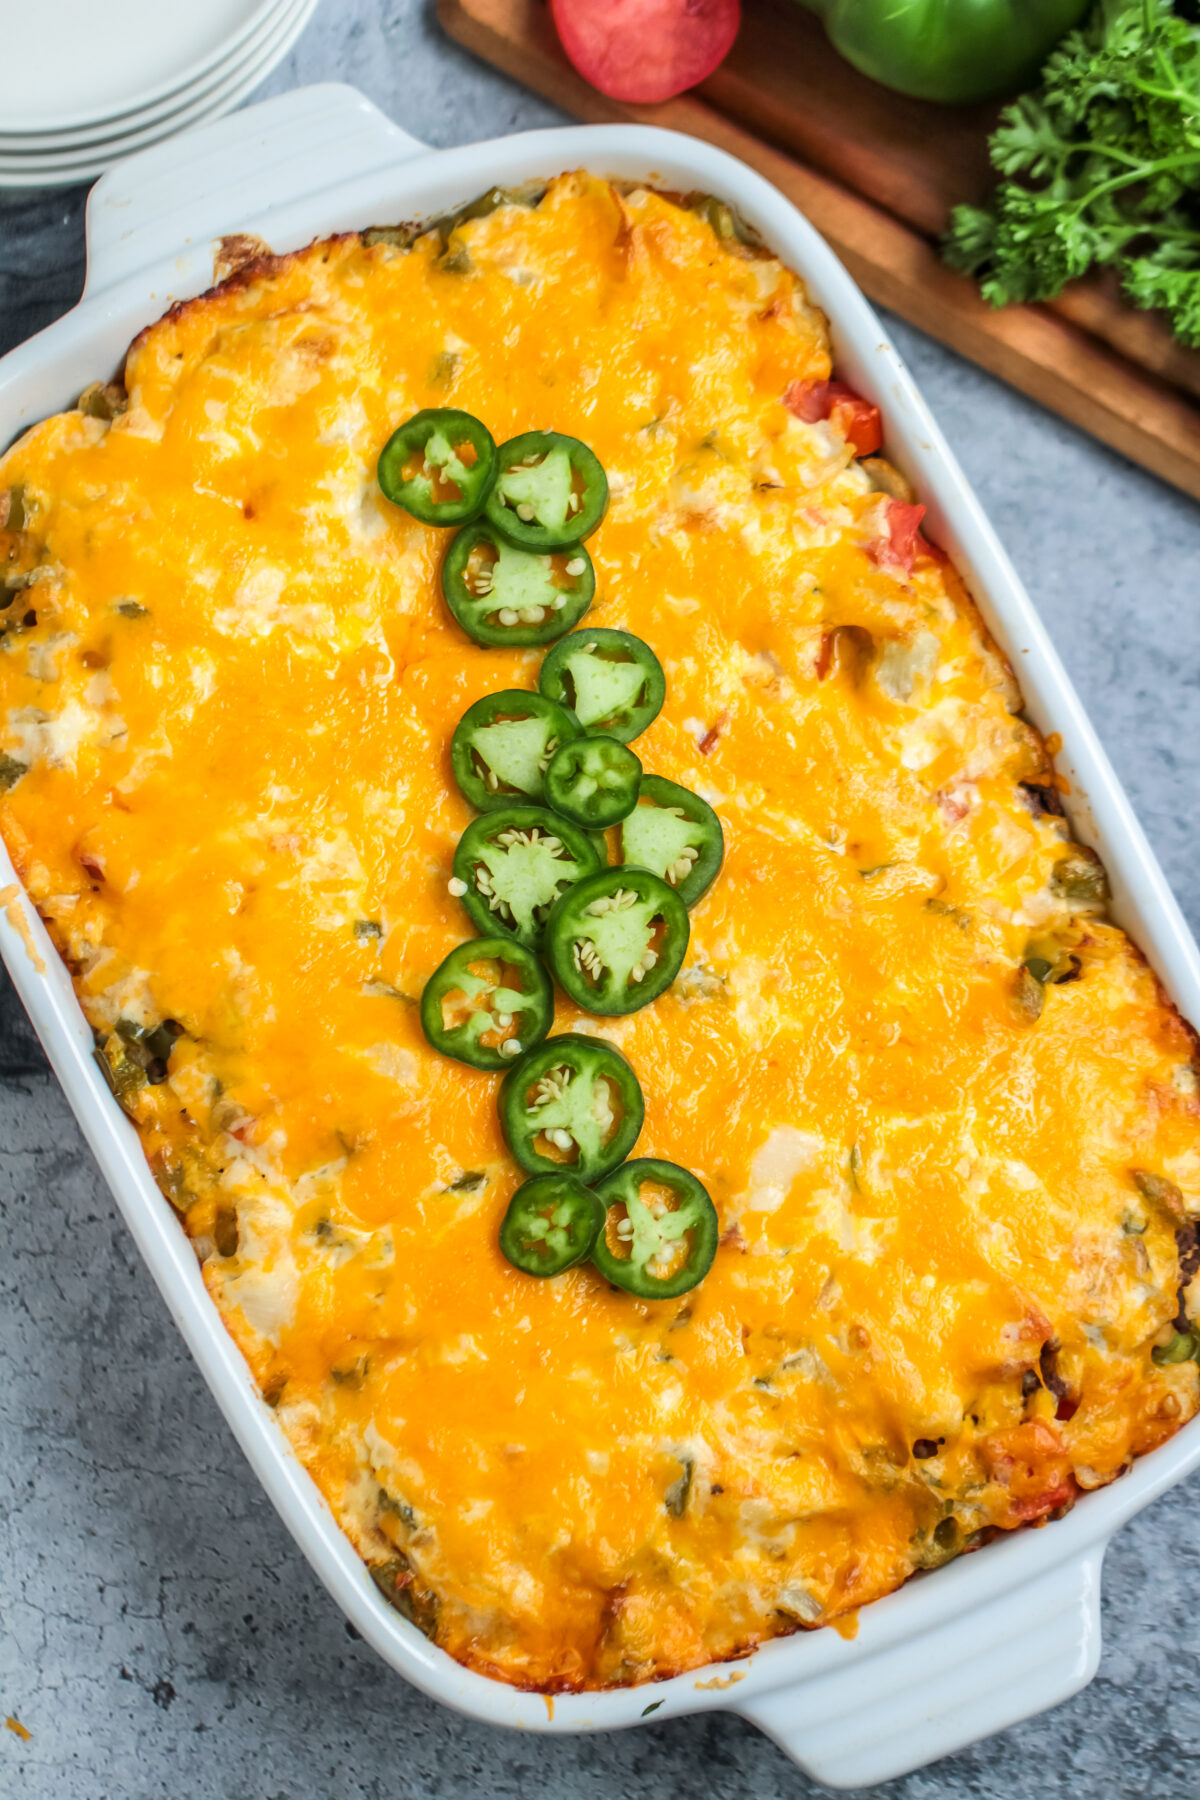 This John Wayne Casserole recipe is easy to make and results in a hearty, comforting casserole dish with loads of south-west flavour!